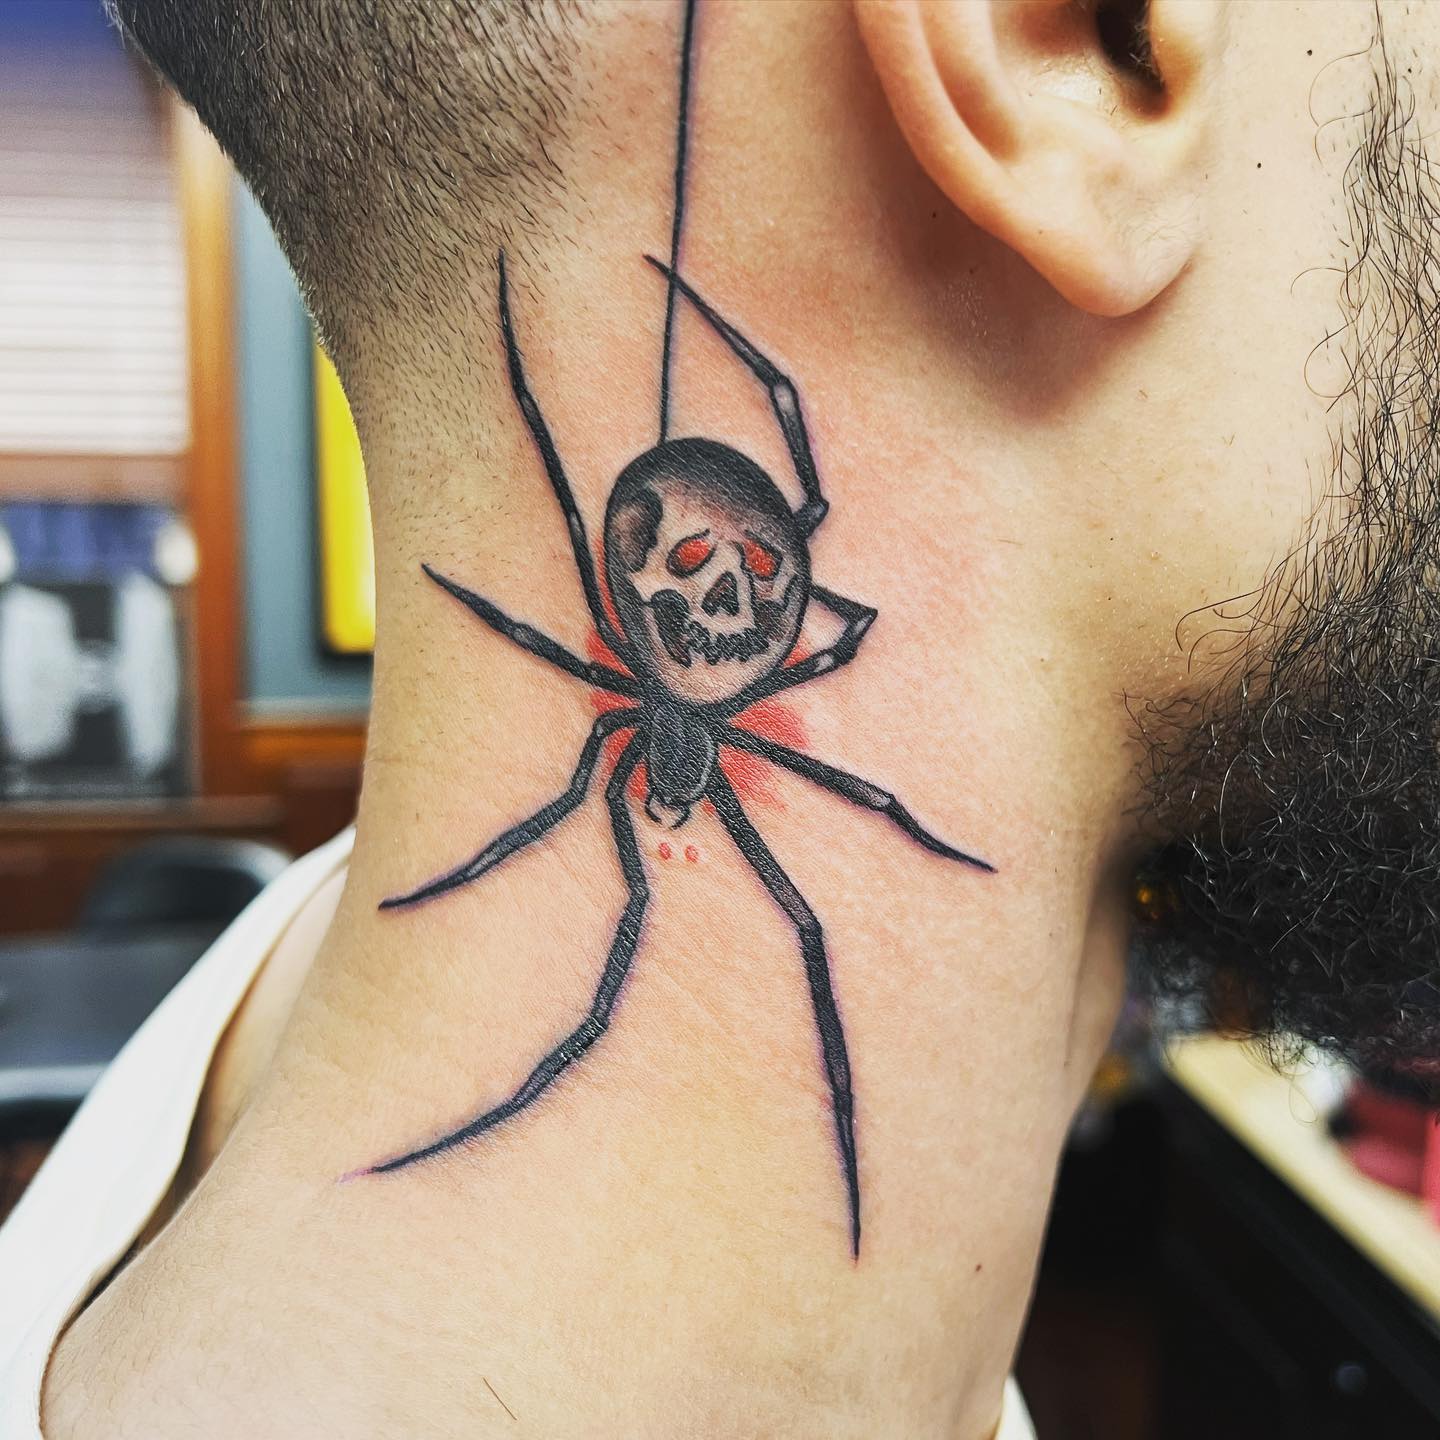 A spider with horrific skull neck tattoo is going to scare your friends when they see it. But that's what makes it more attractive.